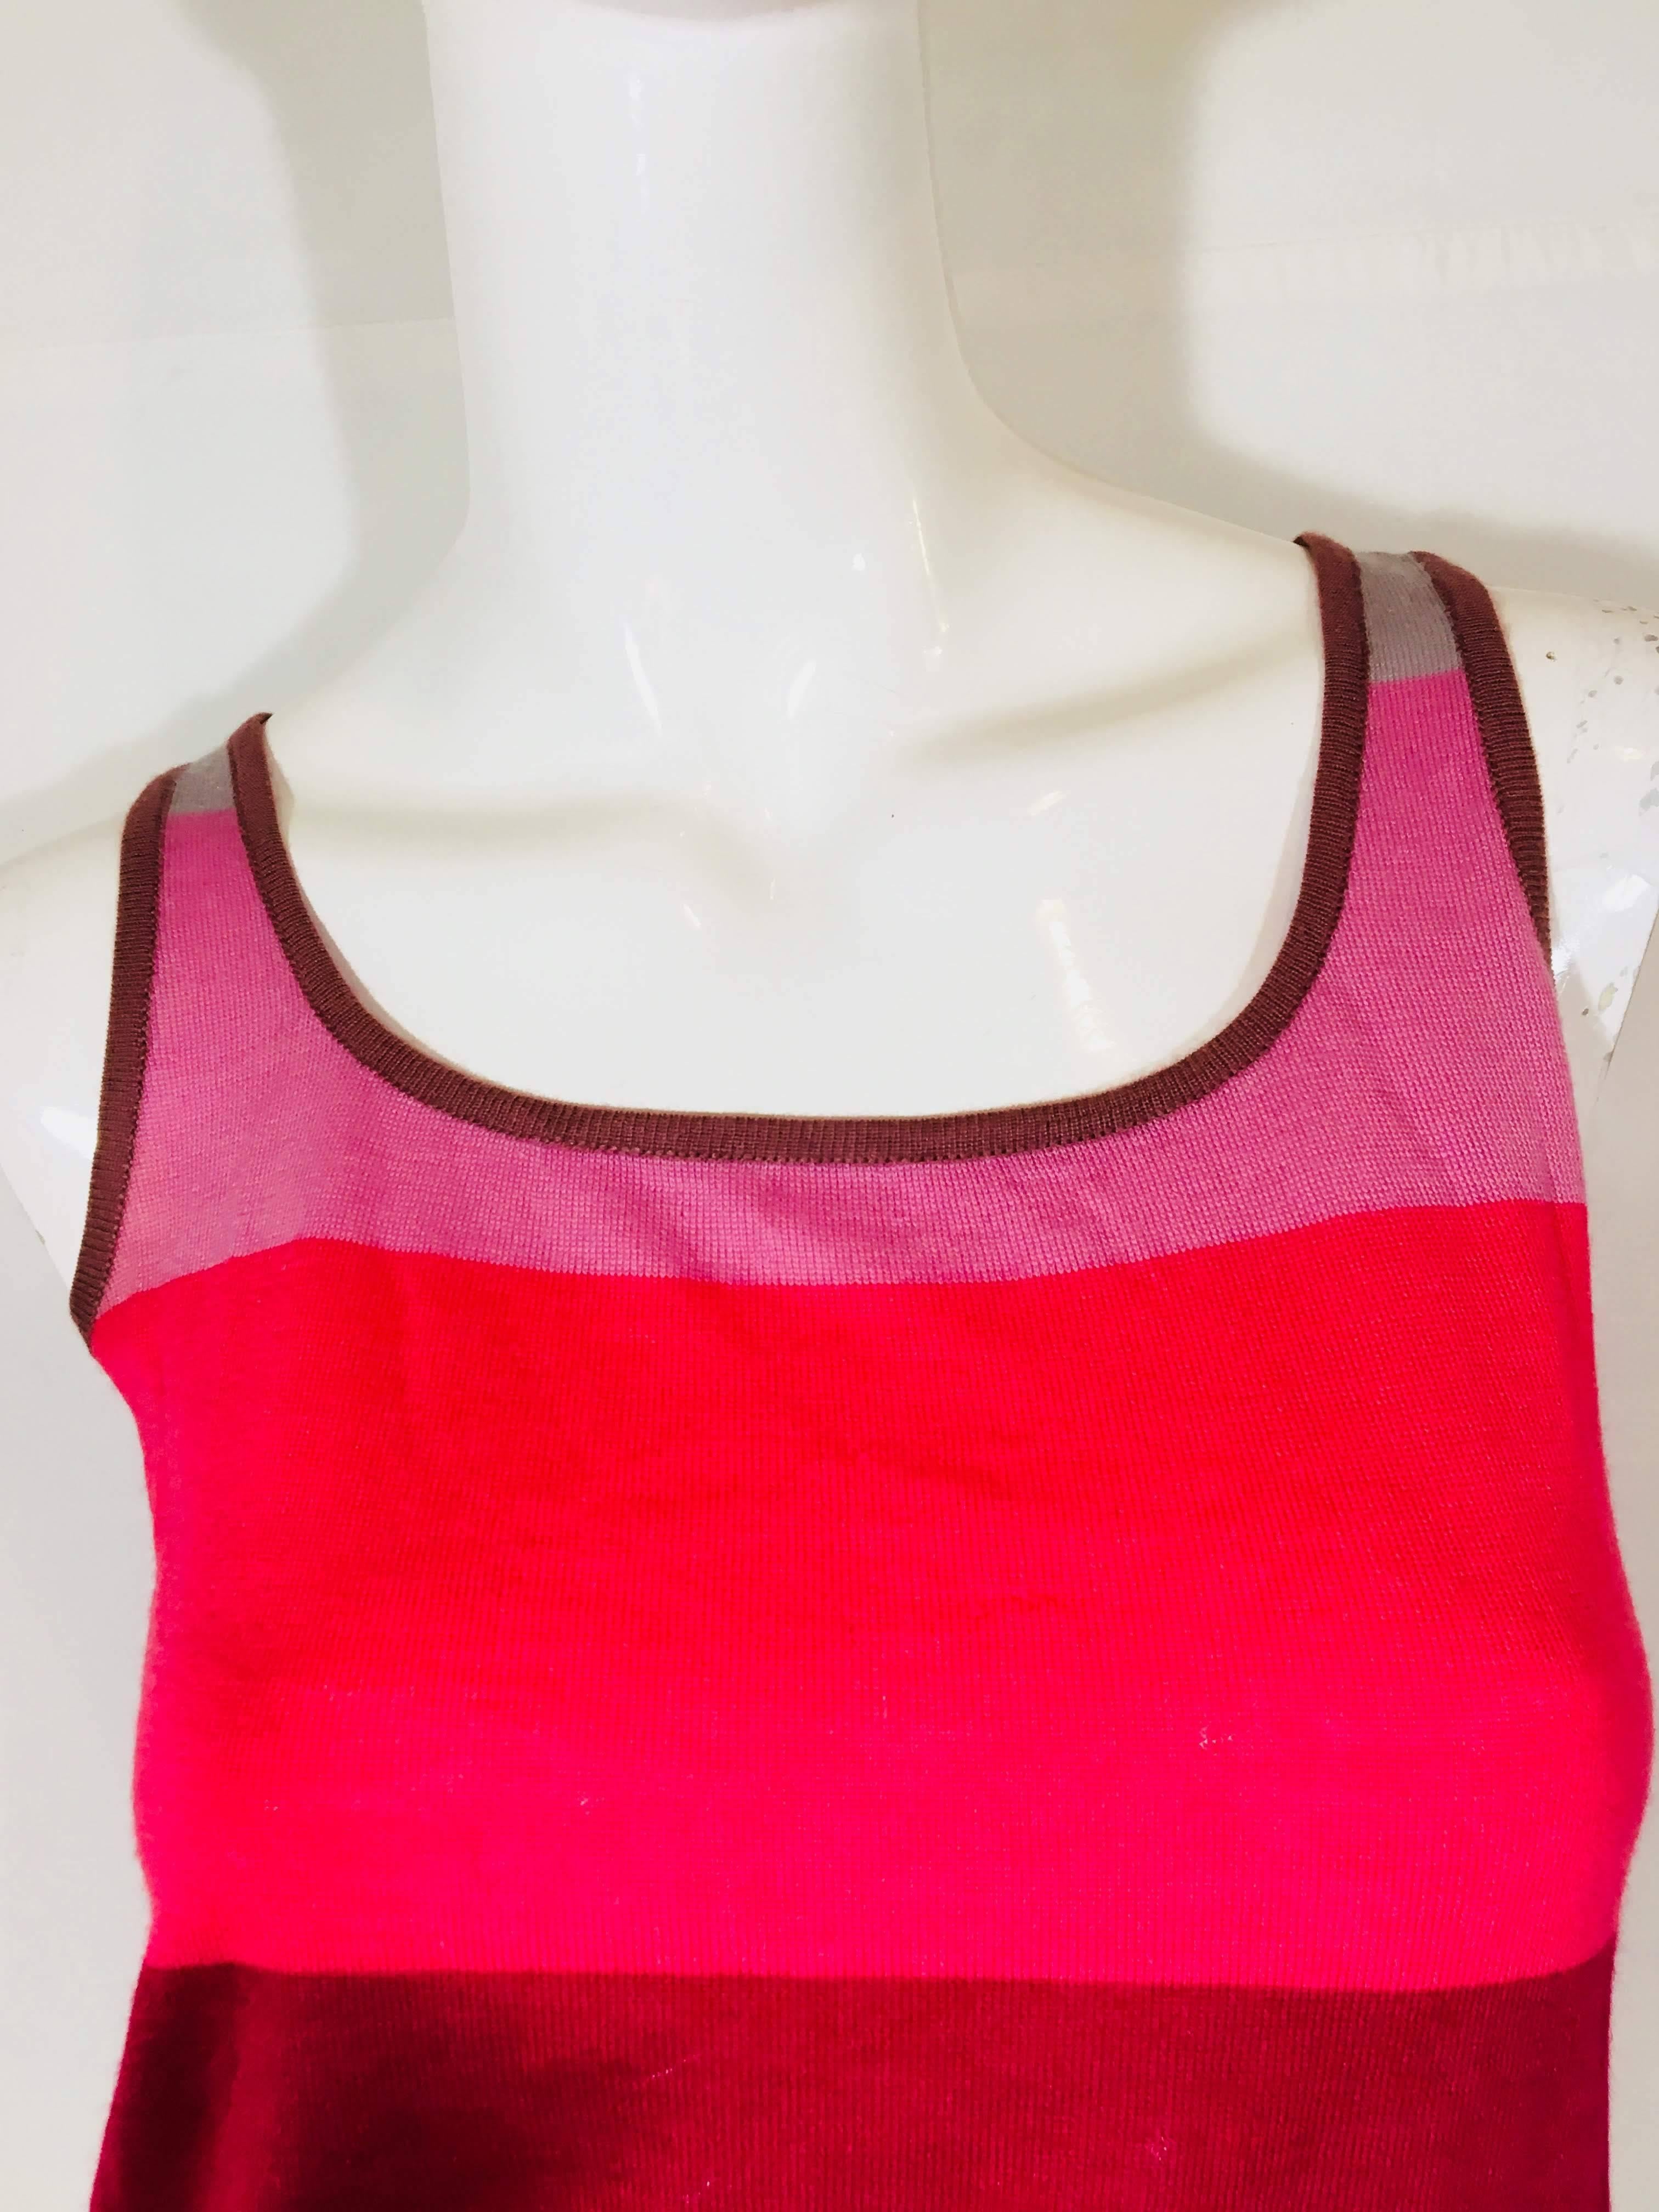 Bill Blass for Bergdorf Goodman Knit Tank in Pink/ Multi Colorblocki Cashmere with Scoop Neck.